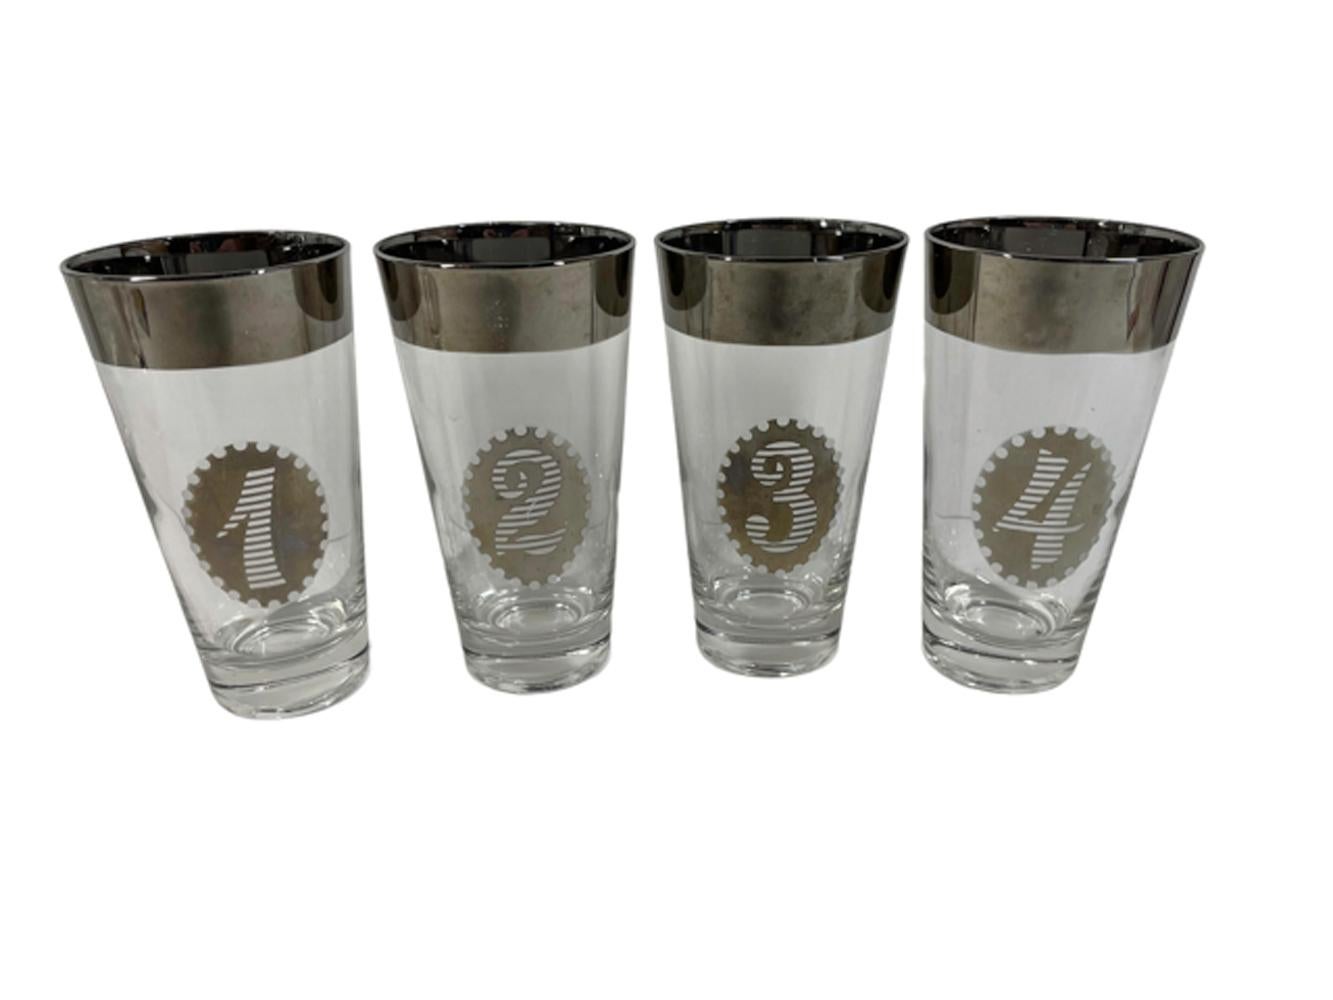 Set of eight highball glasses numbered 1 to 8 having wide silver rims and oval medallions with stylized numerals in the center.